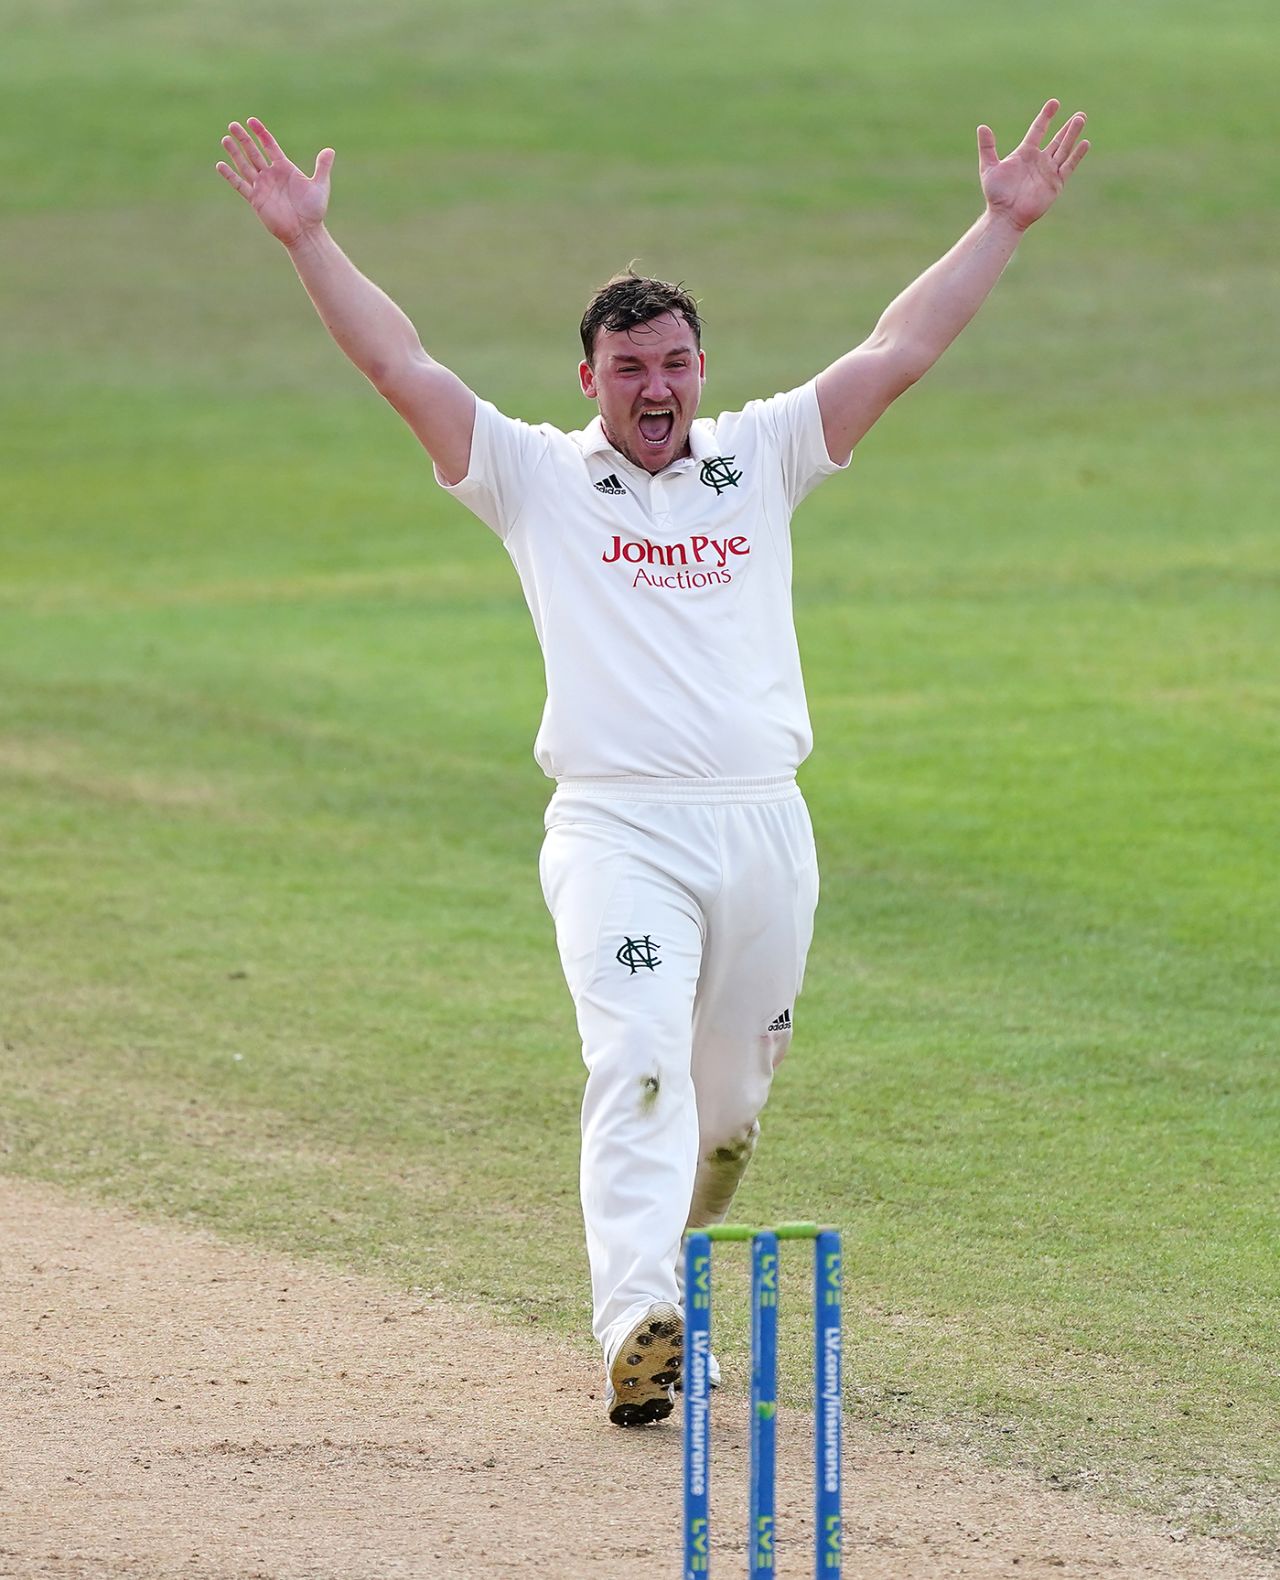 Liam Patterson-White helped Notts wrap up victory, Nottinghamshire vs Durham, County Championship, Division Two, Trent Bridge, September 29, 2022